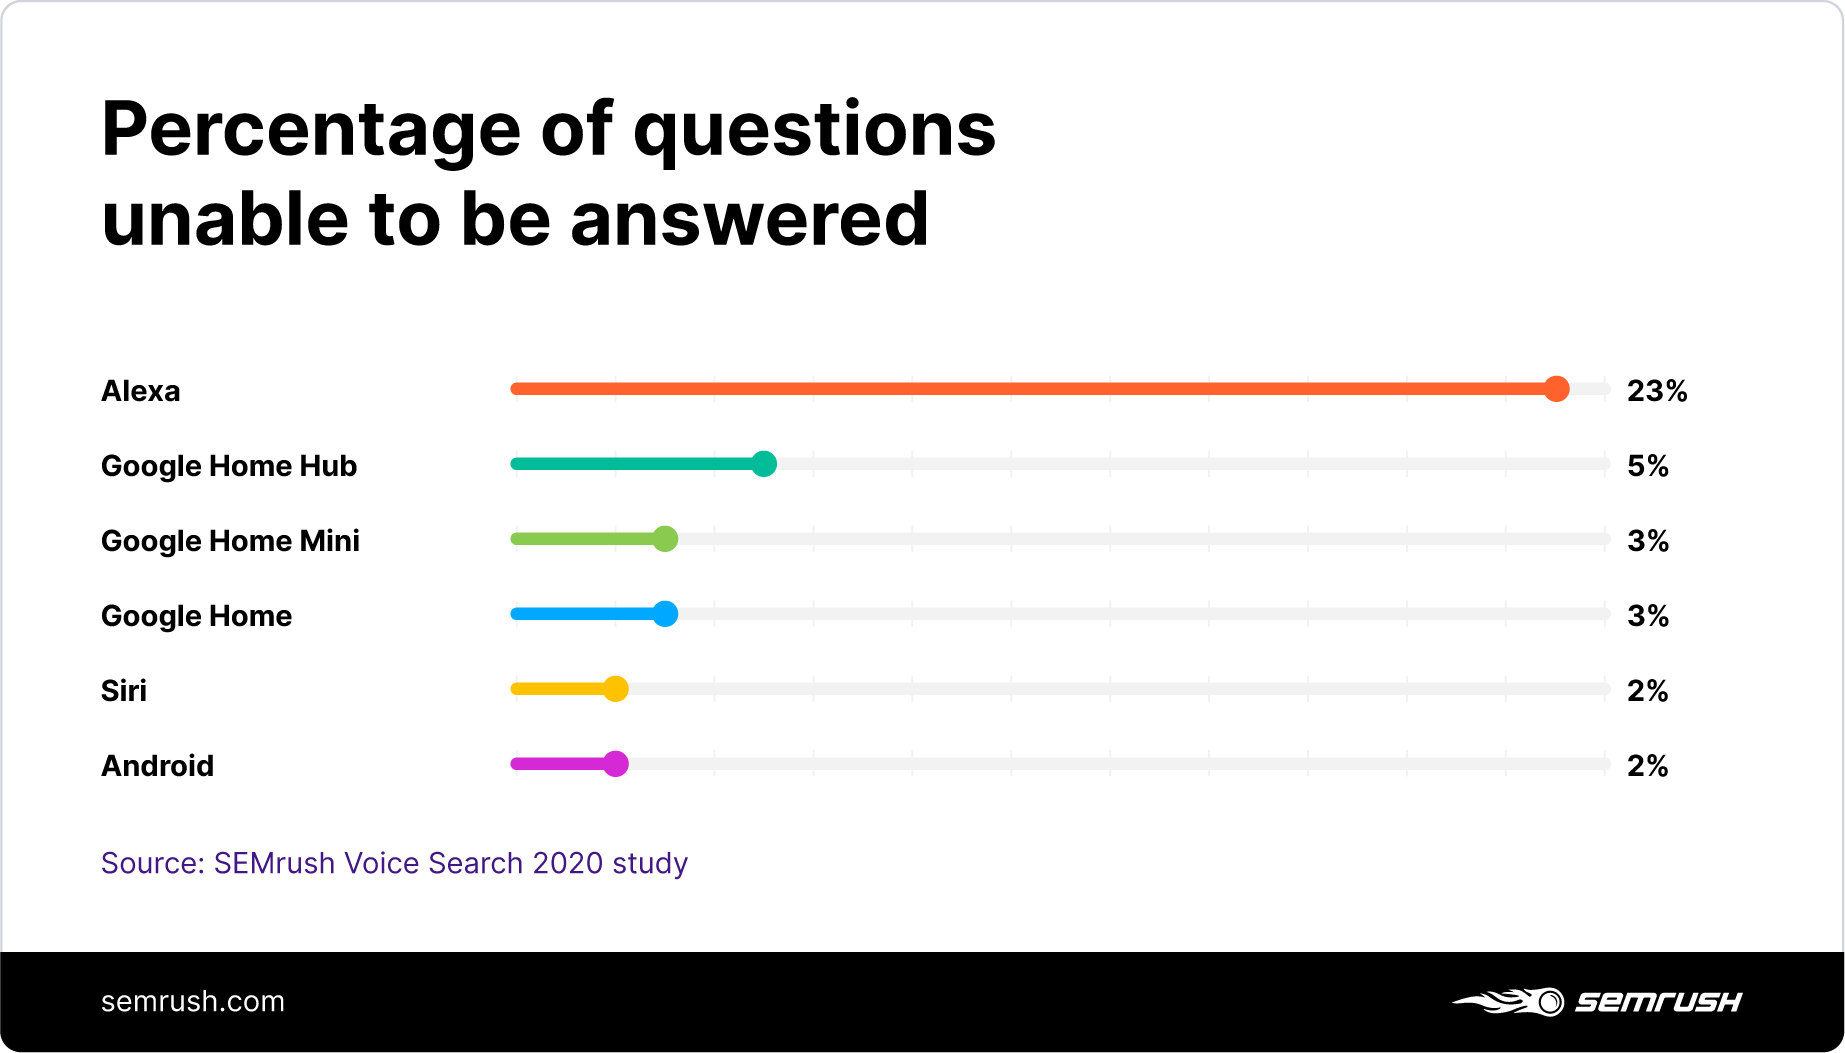 Percentage of questions unable to be answered by voice assistants